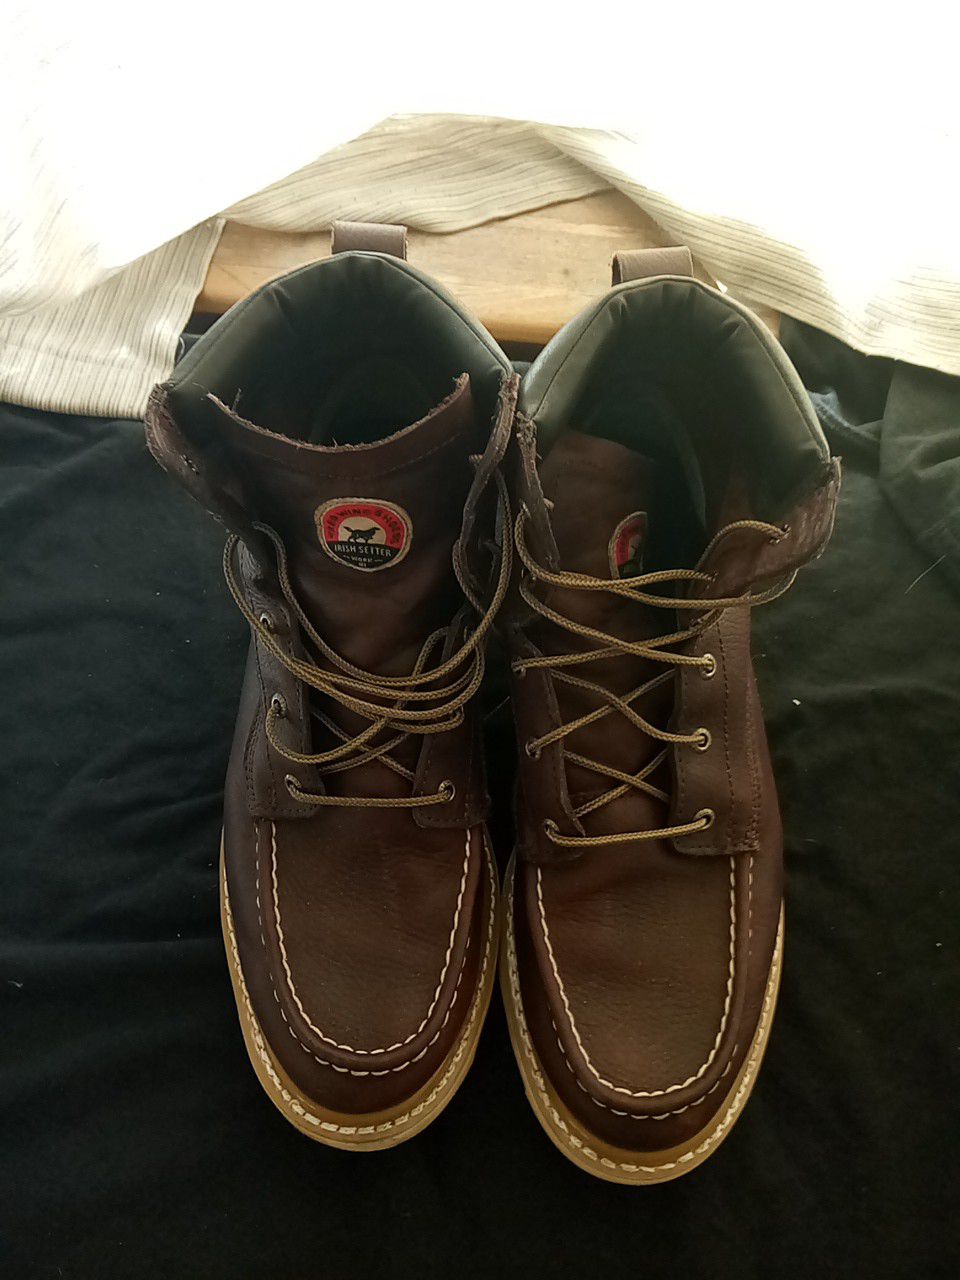 Red Wing Irish Setter work boots